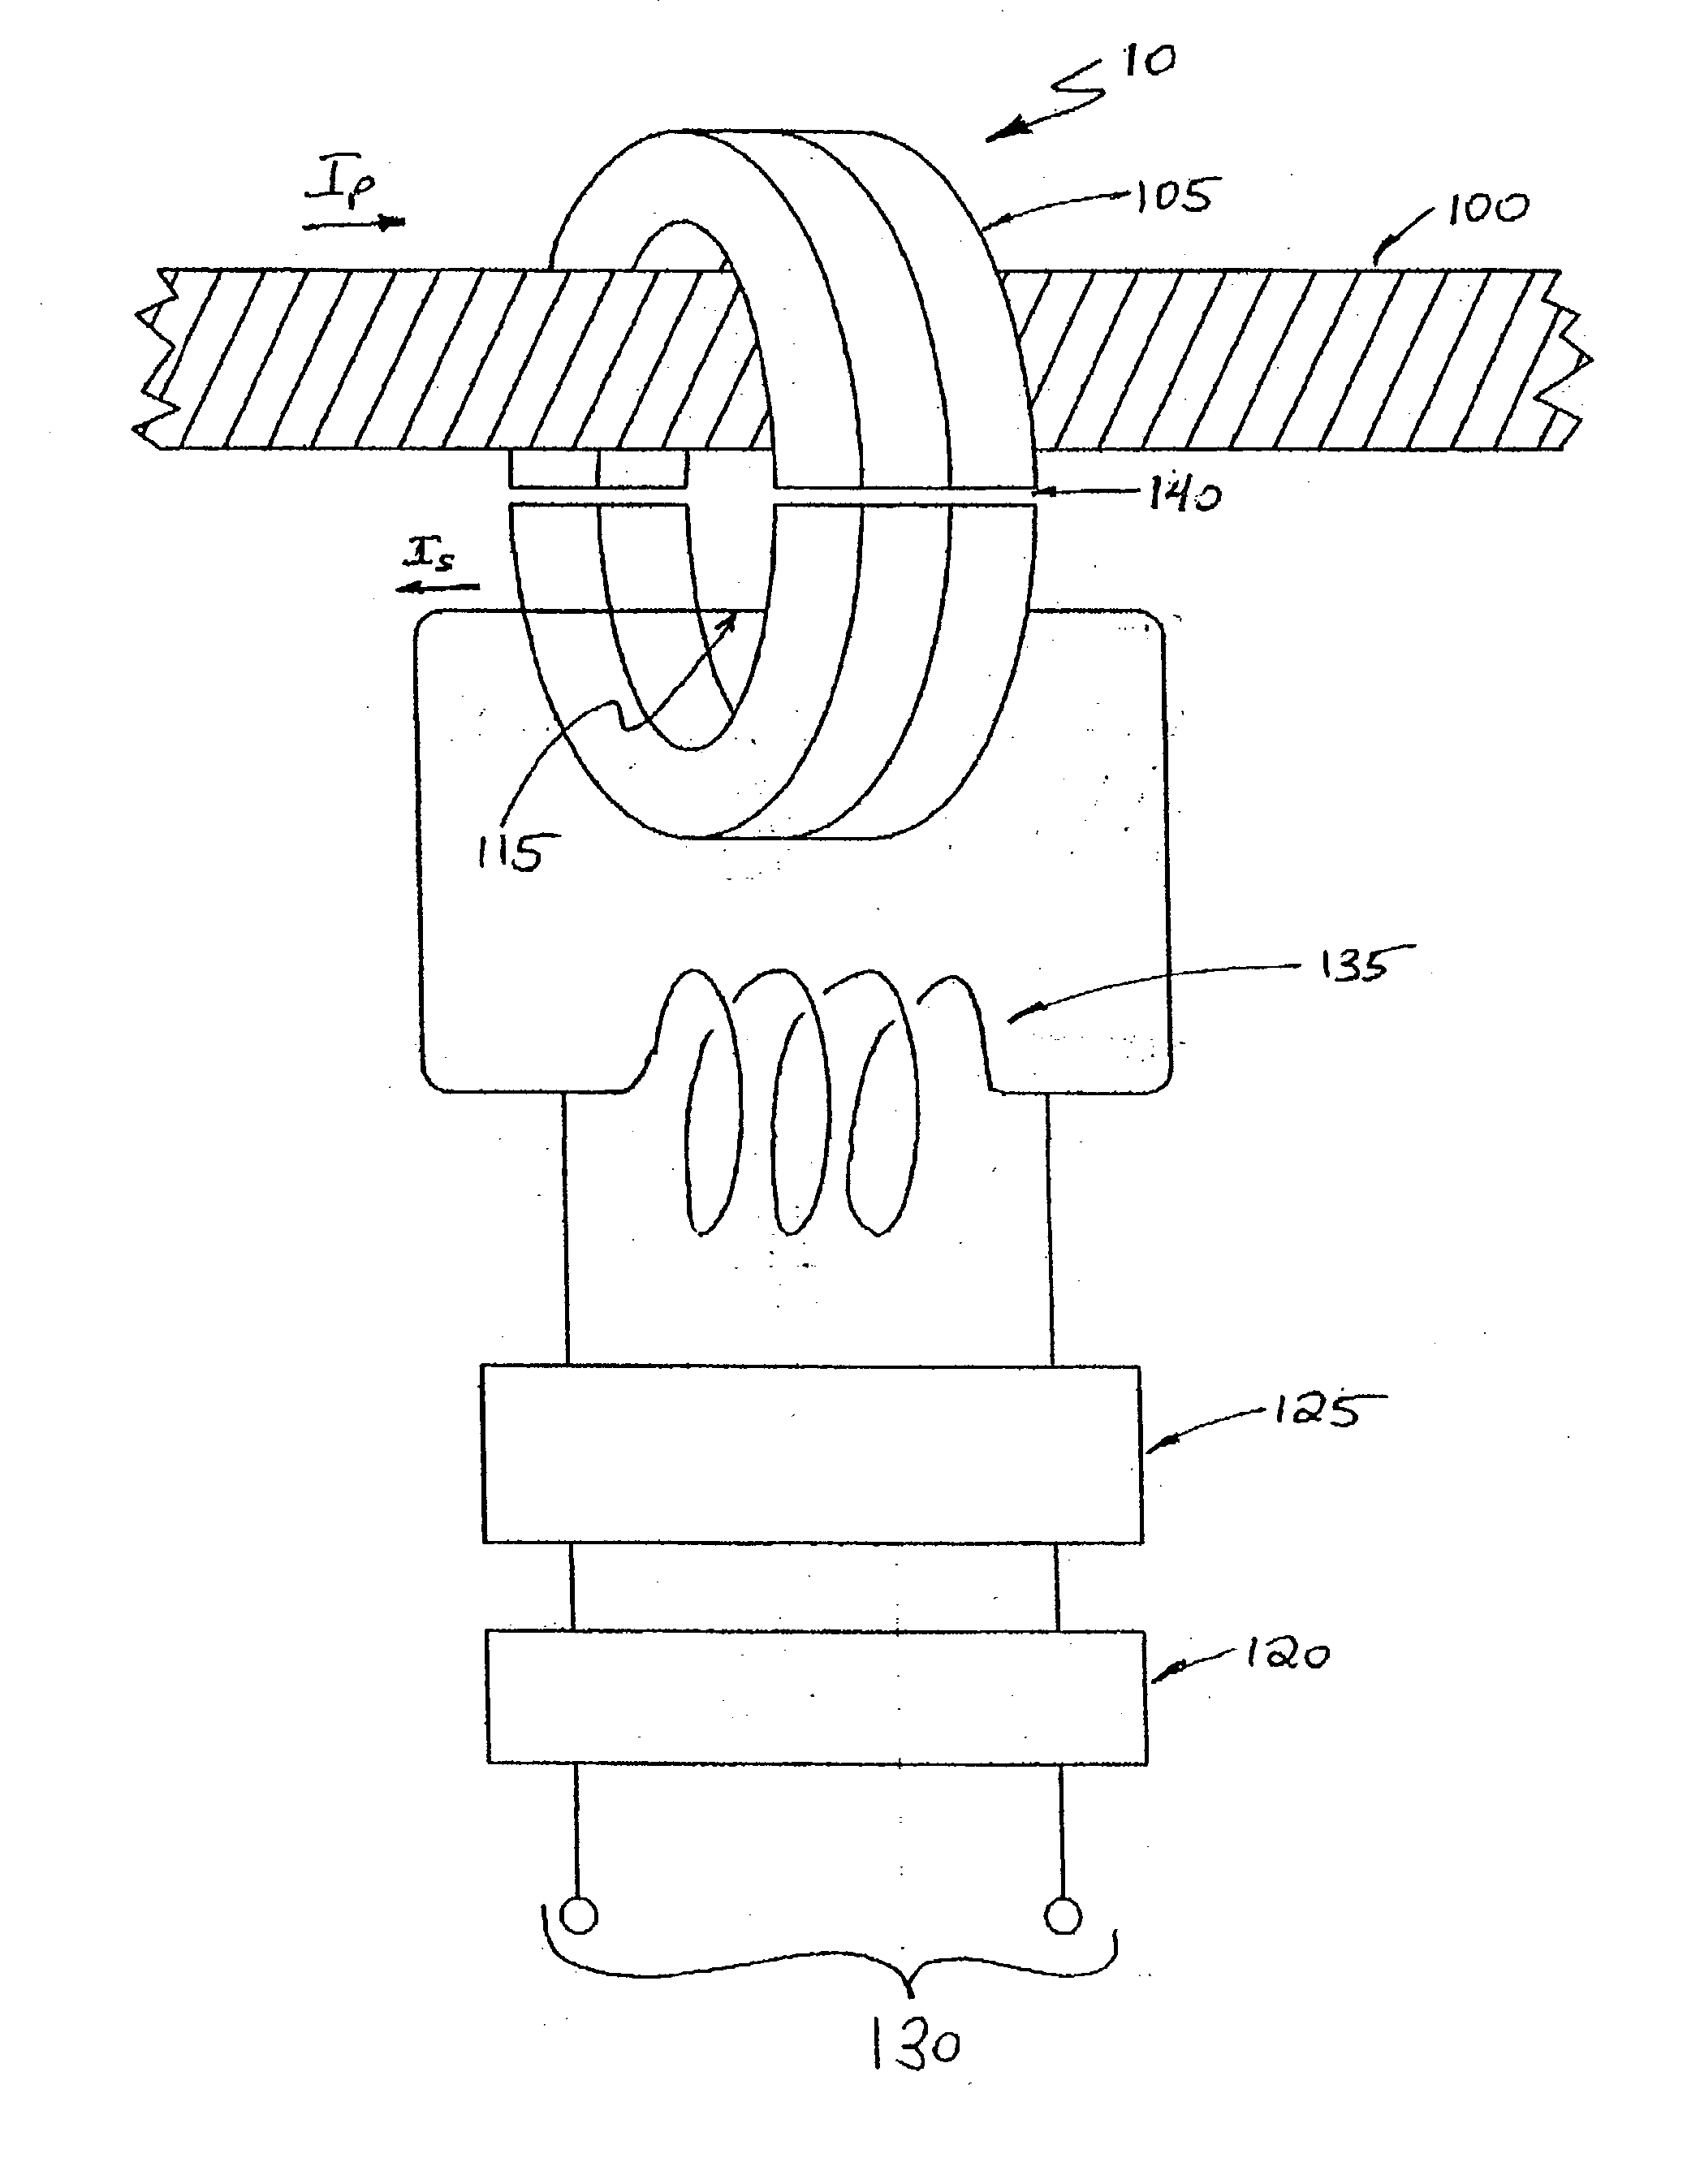 High current inductive coupler and current transformer for power lines